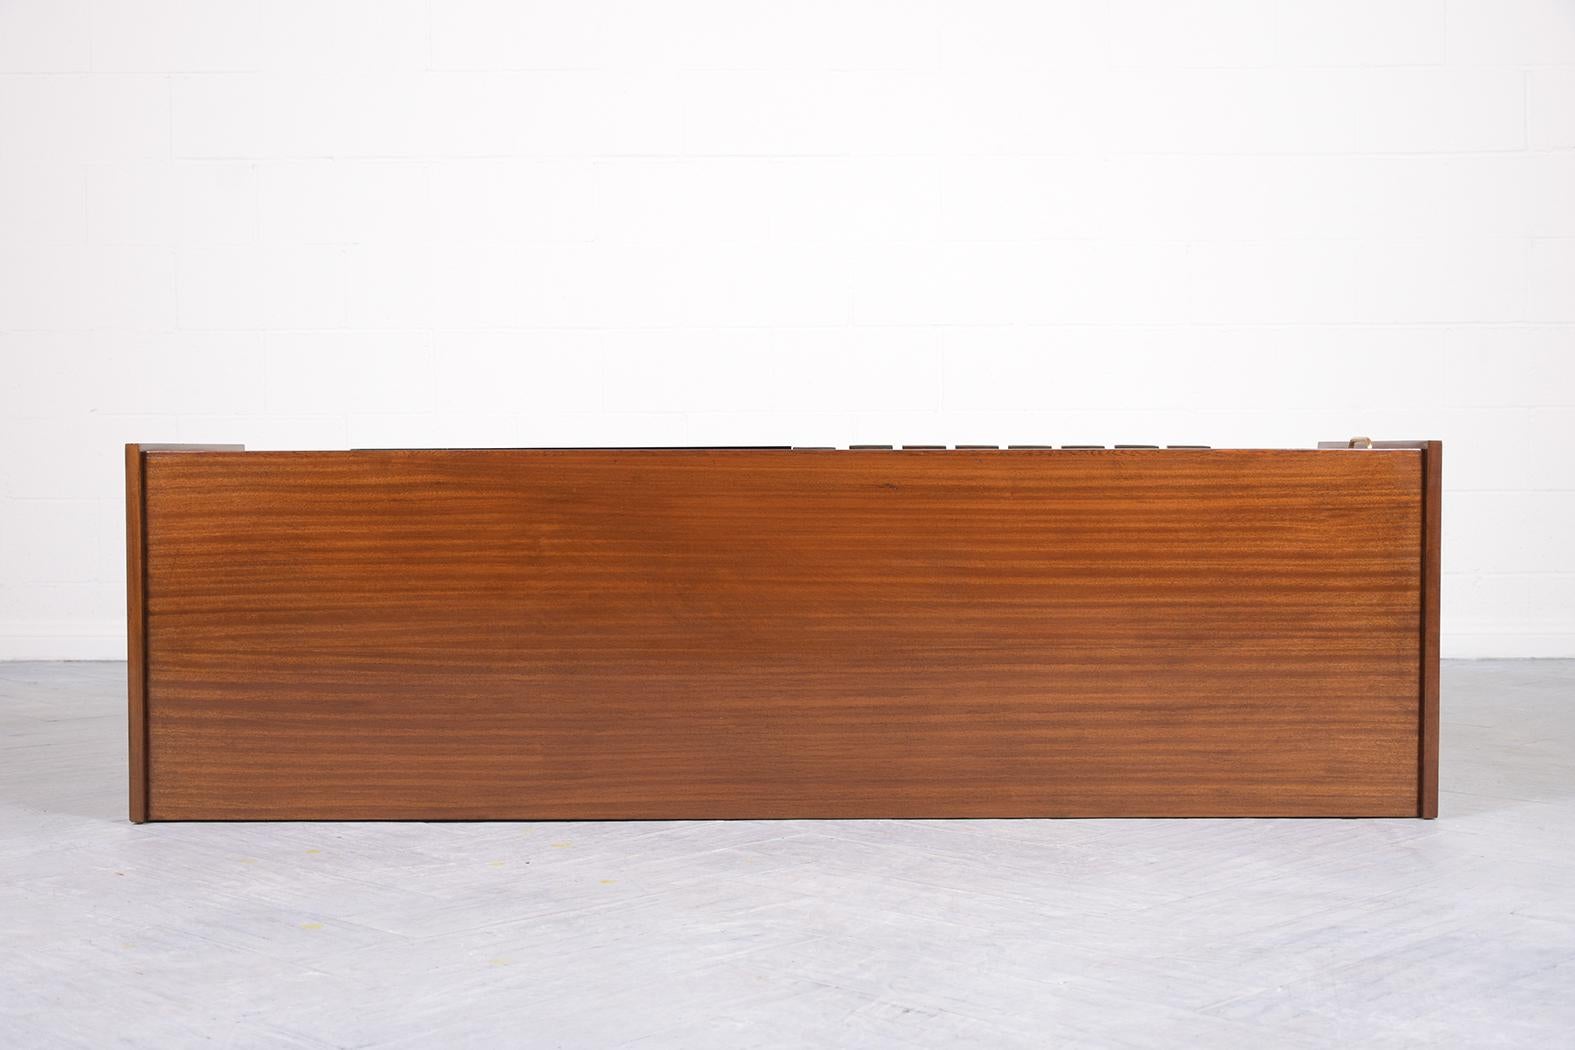 Vintage French Buffet: René-Jean Caillette Style in Mahogany & White Oak For Sale 5